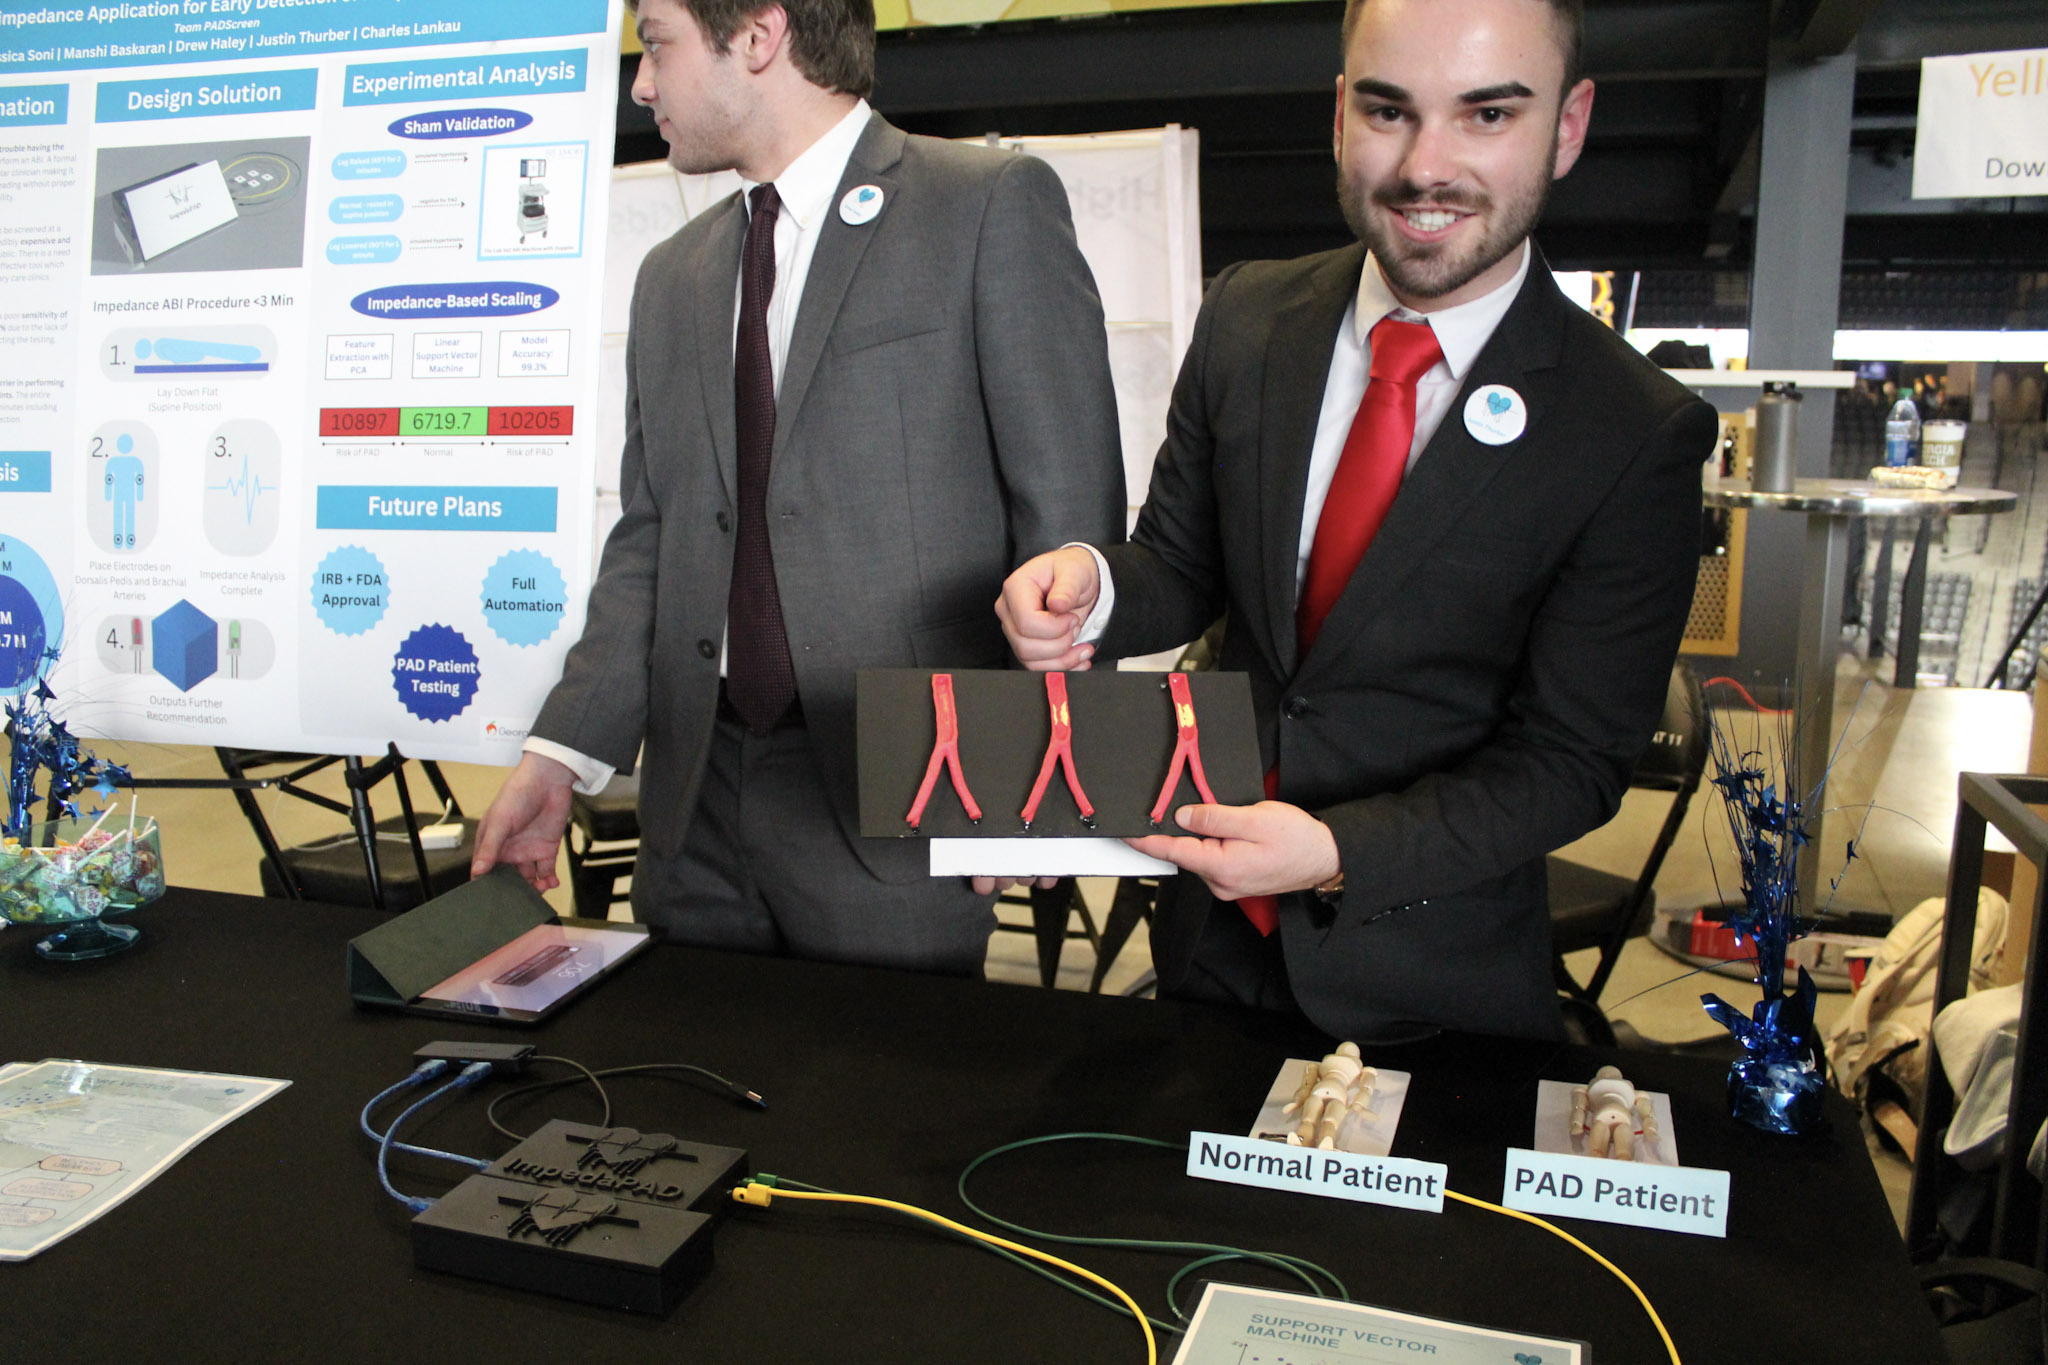 A male student shows a model of three different stages of arterial disease as part of his team's capstone project. Another male student stands behind him near a poster presentation board.